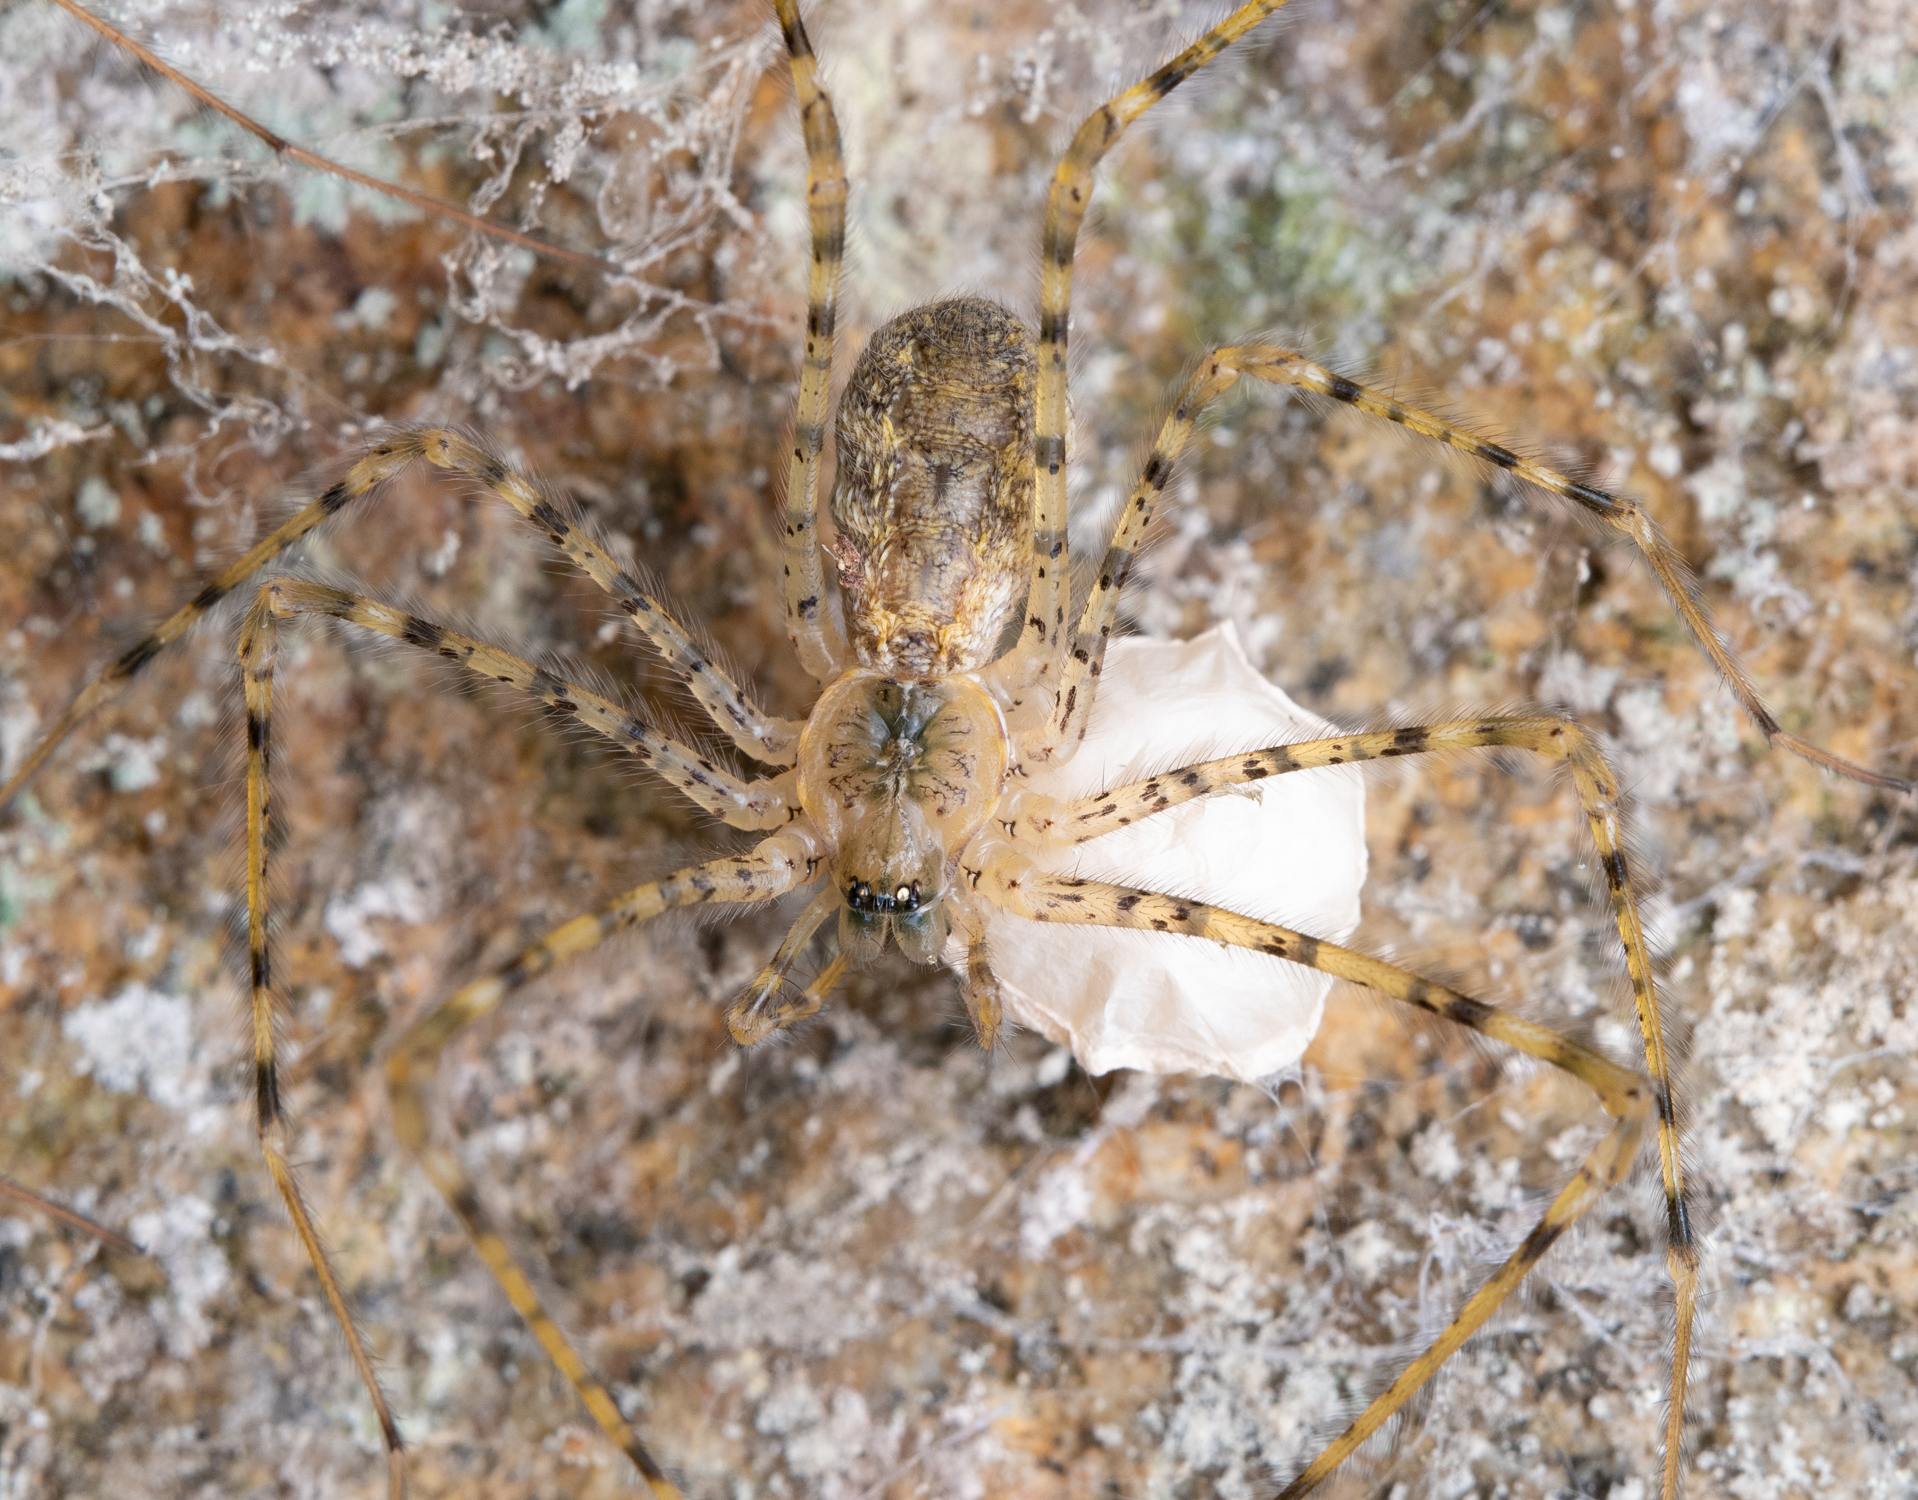 A beige and black female spider with an eggsac the size of a pea